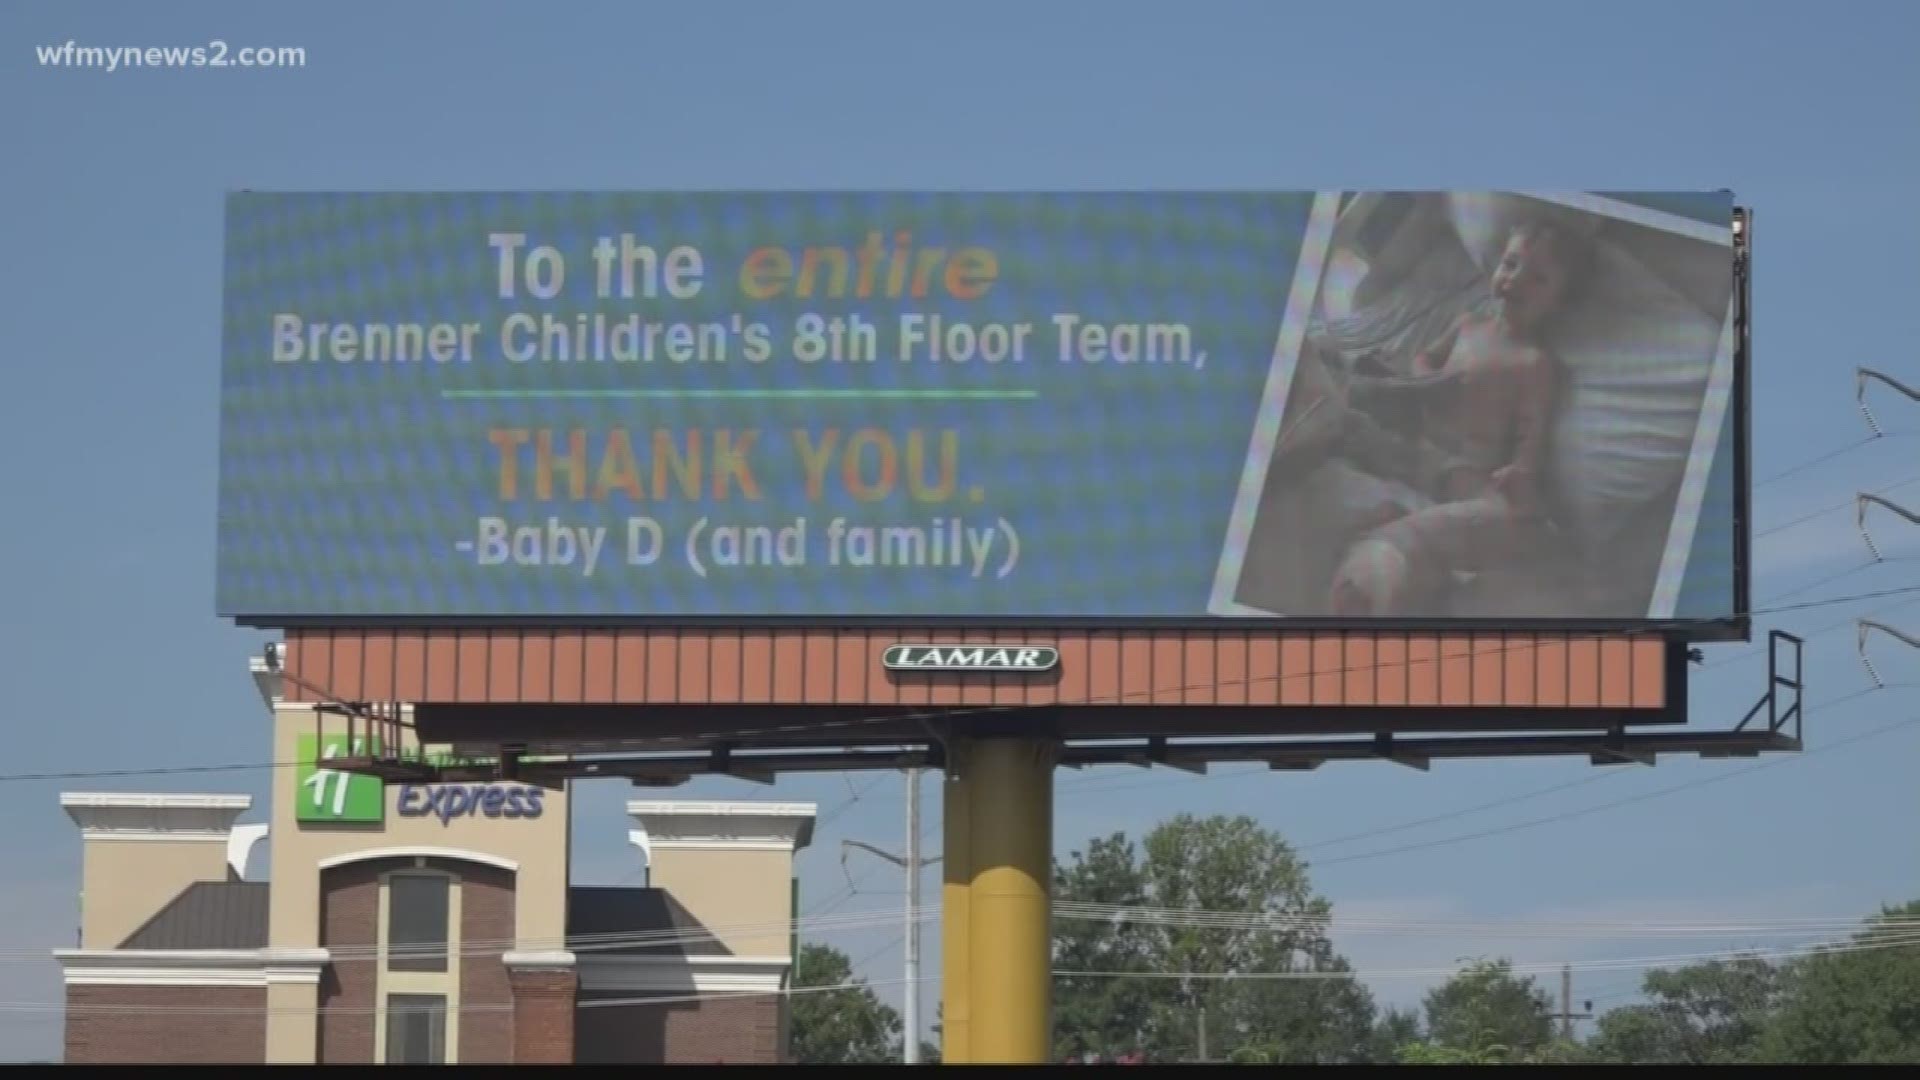 You can see the billboard driving east down business 40 near Brenner Children's Hospital.